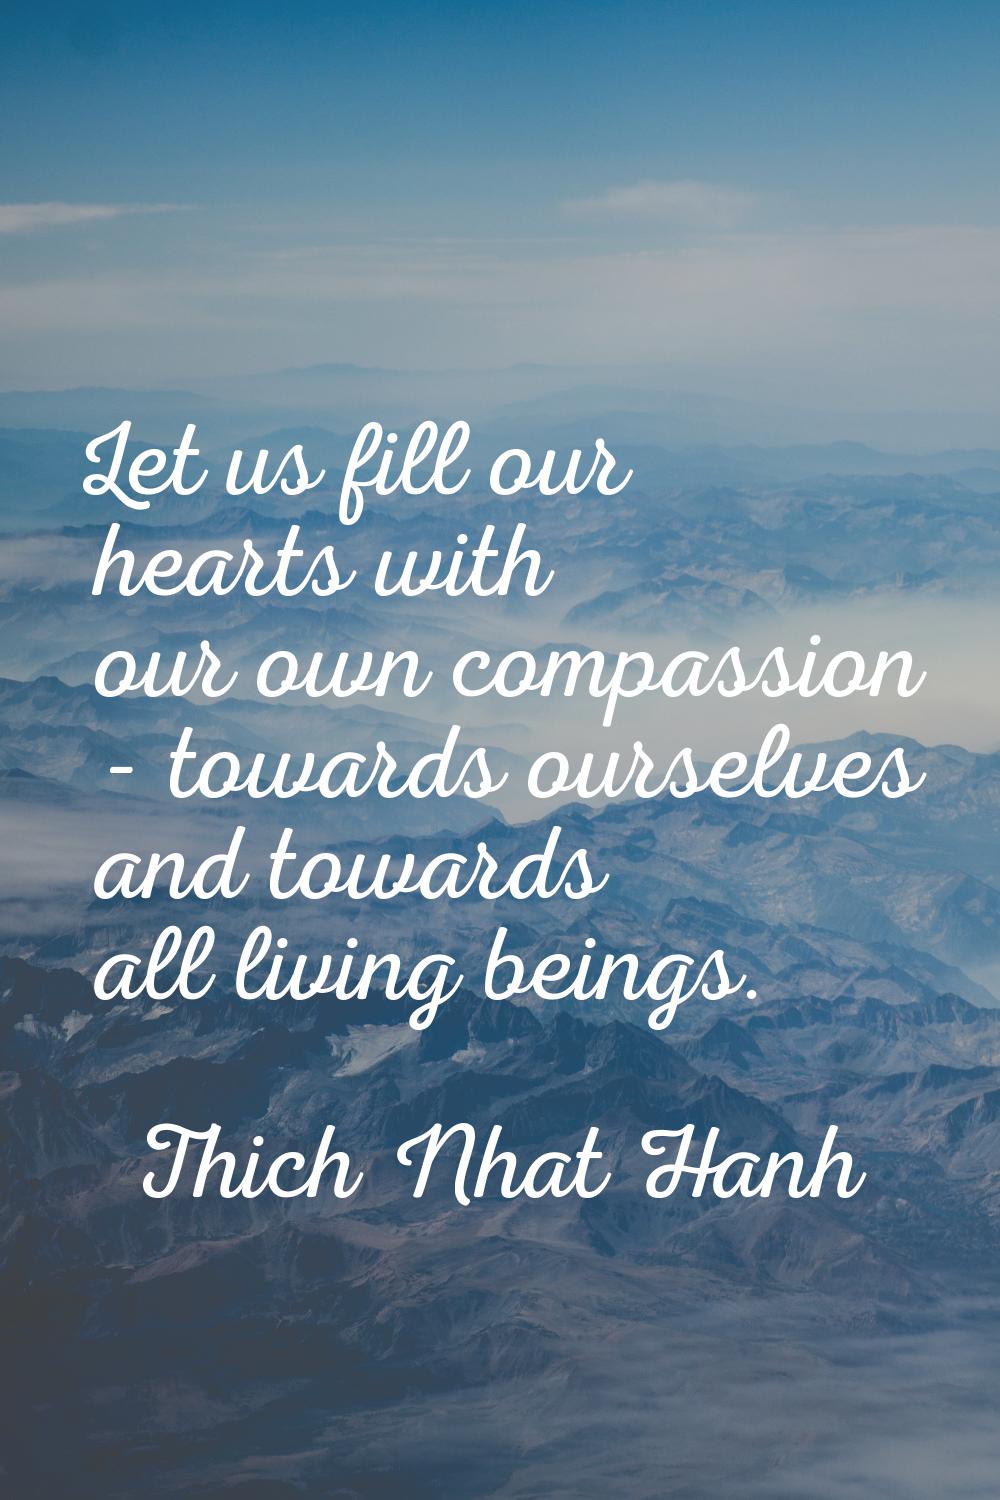 Let us fill our hearts with our own compassion - towards ourselves and towards all living beings.